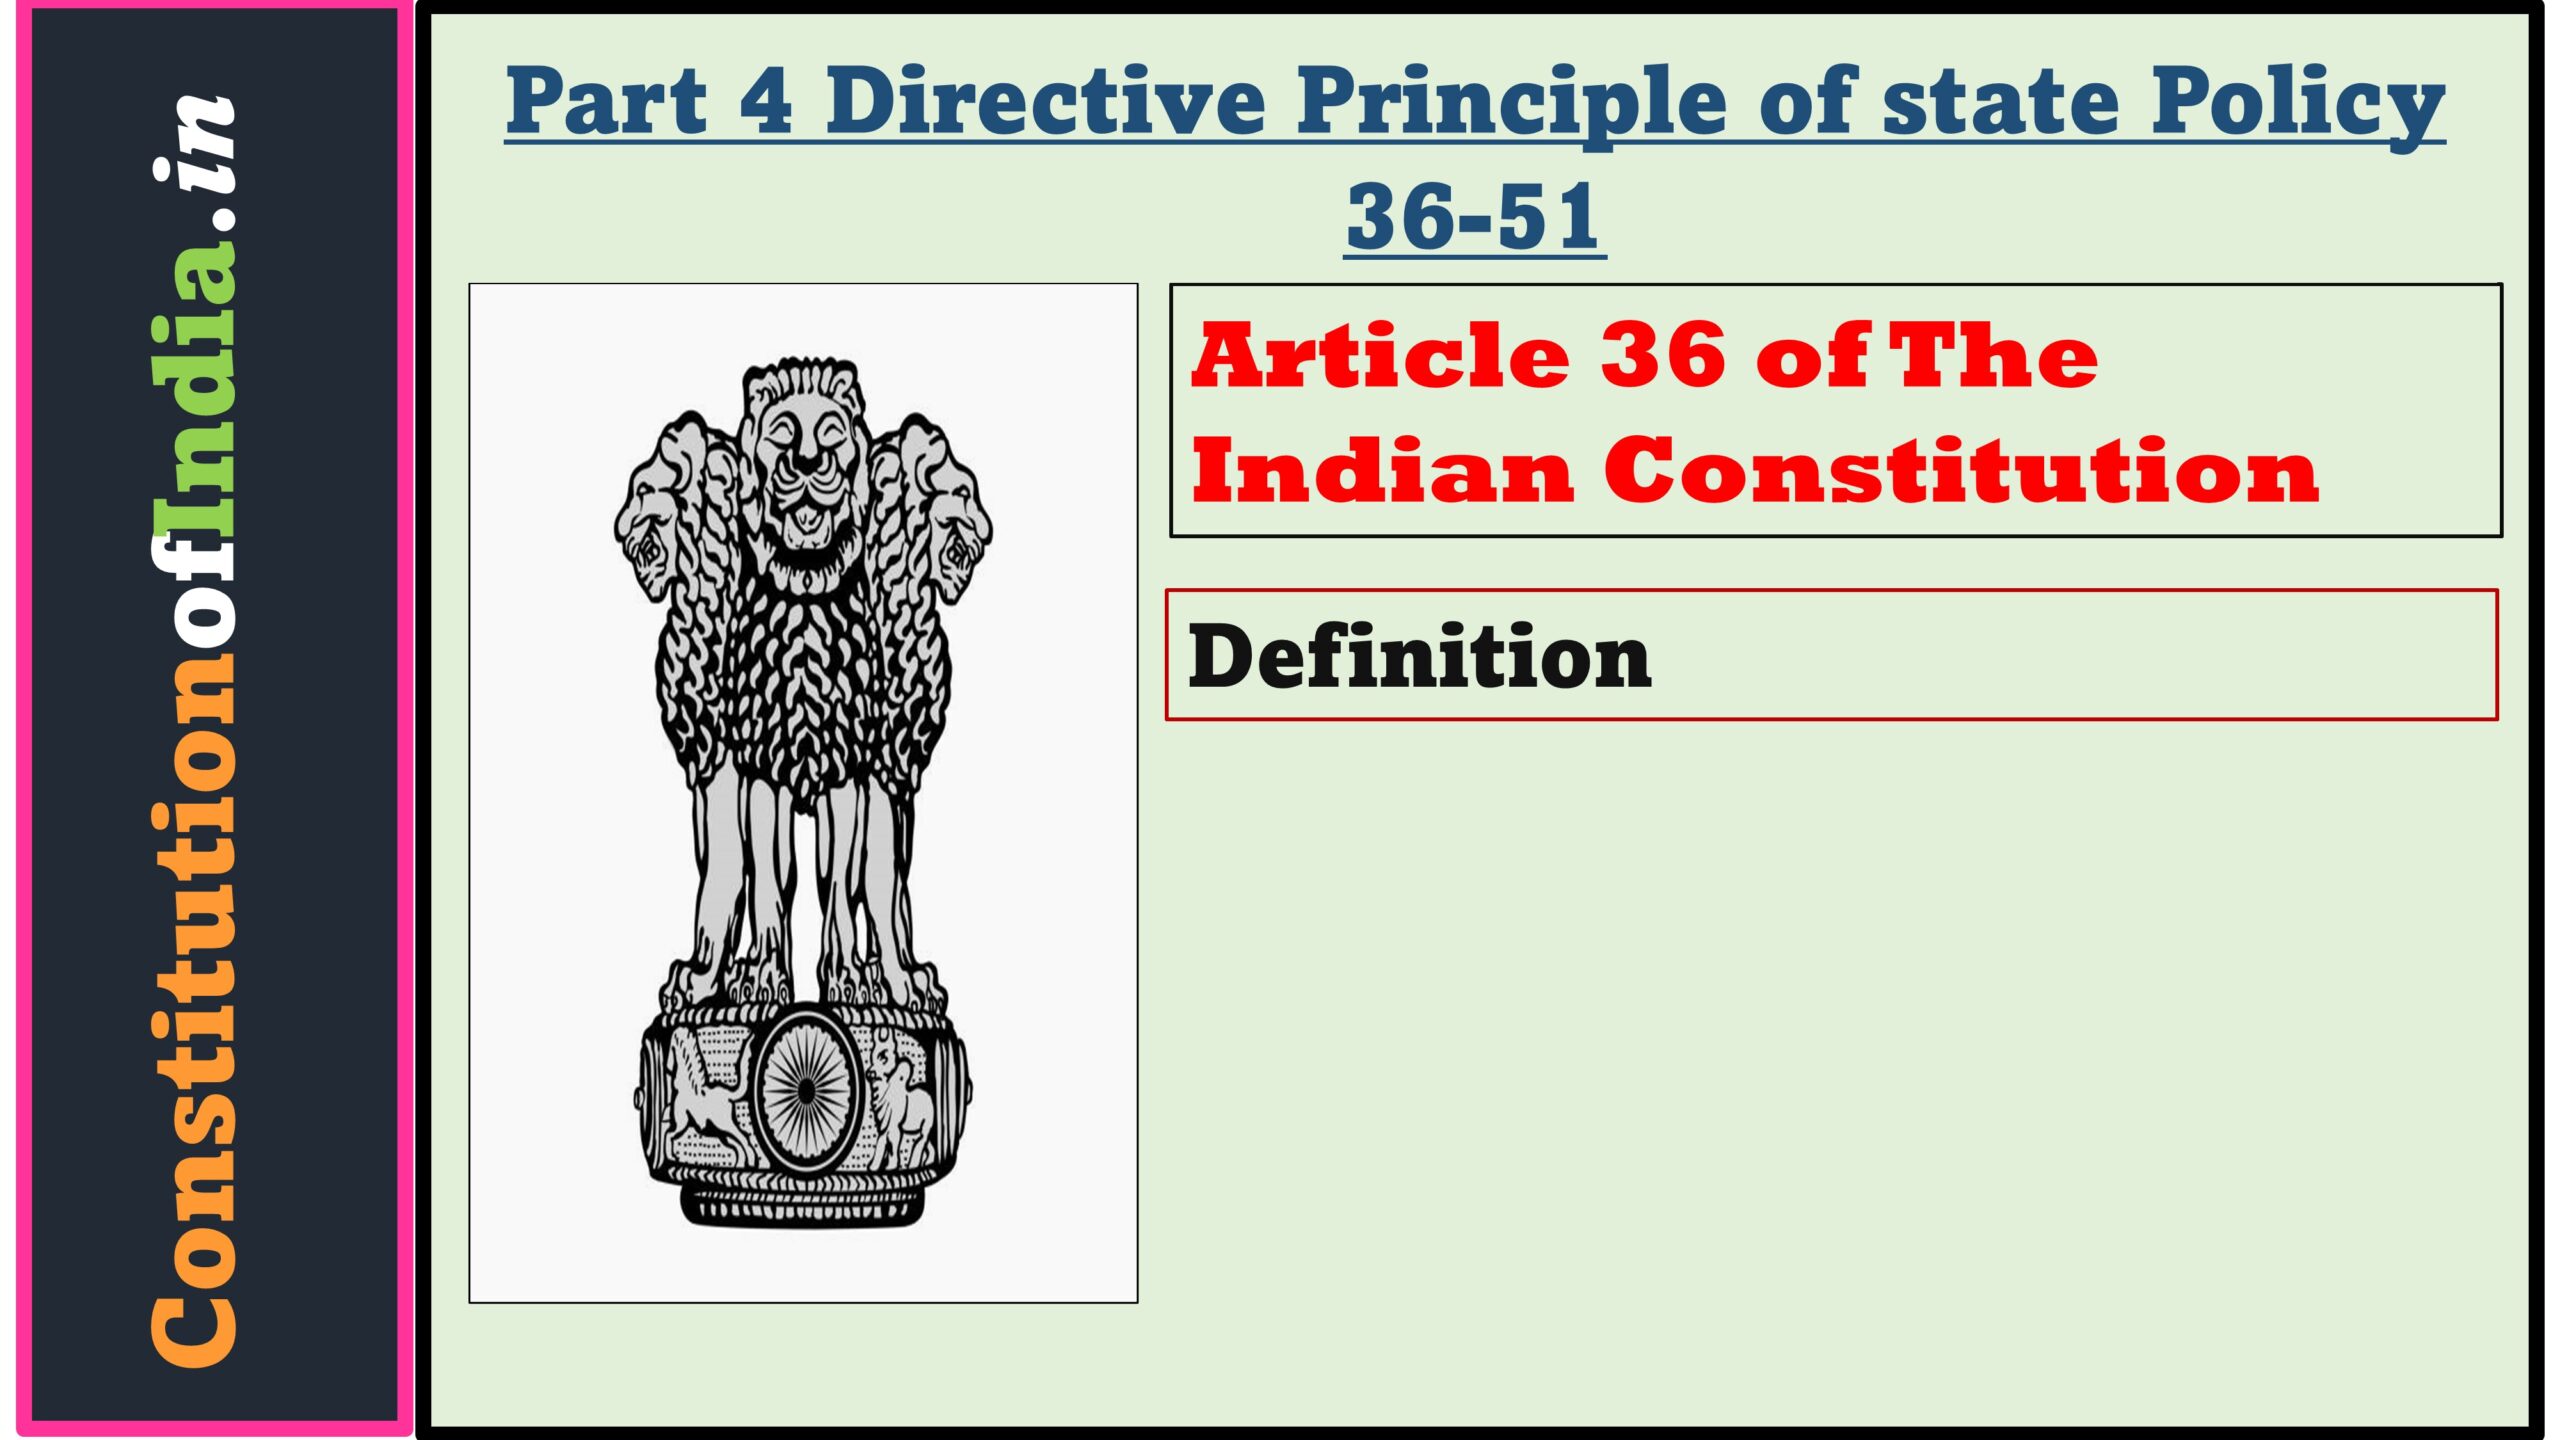 Article 36 of Indian Constitution